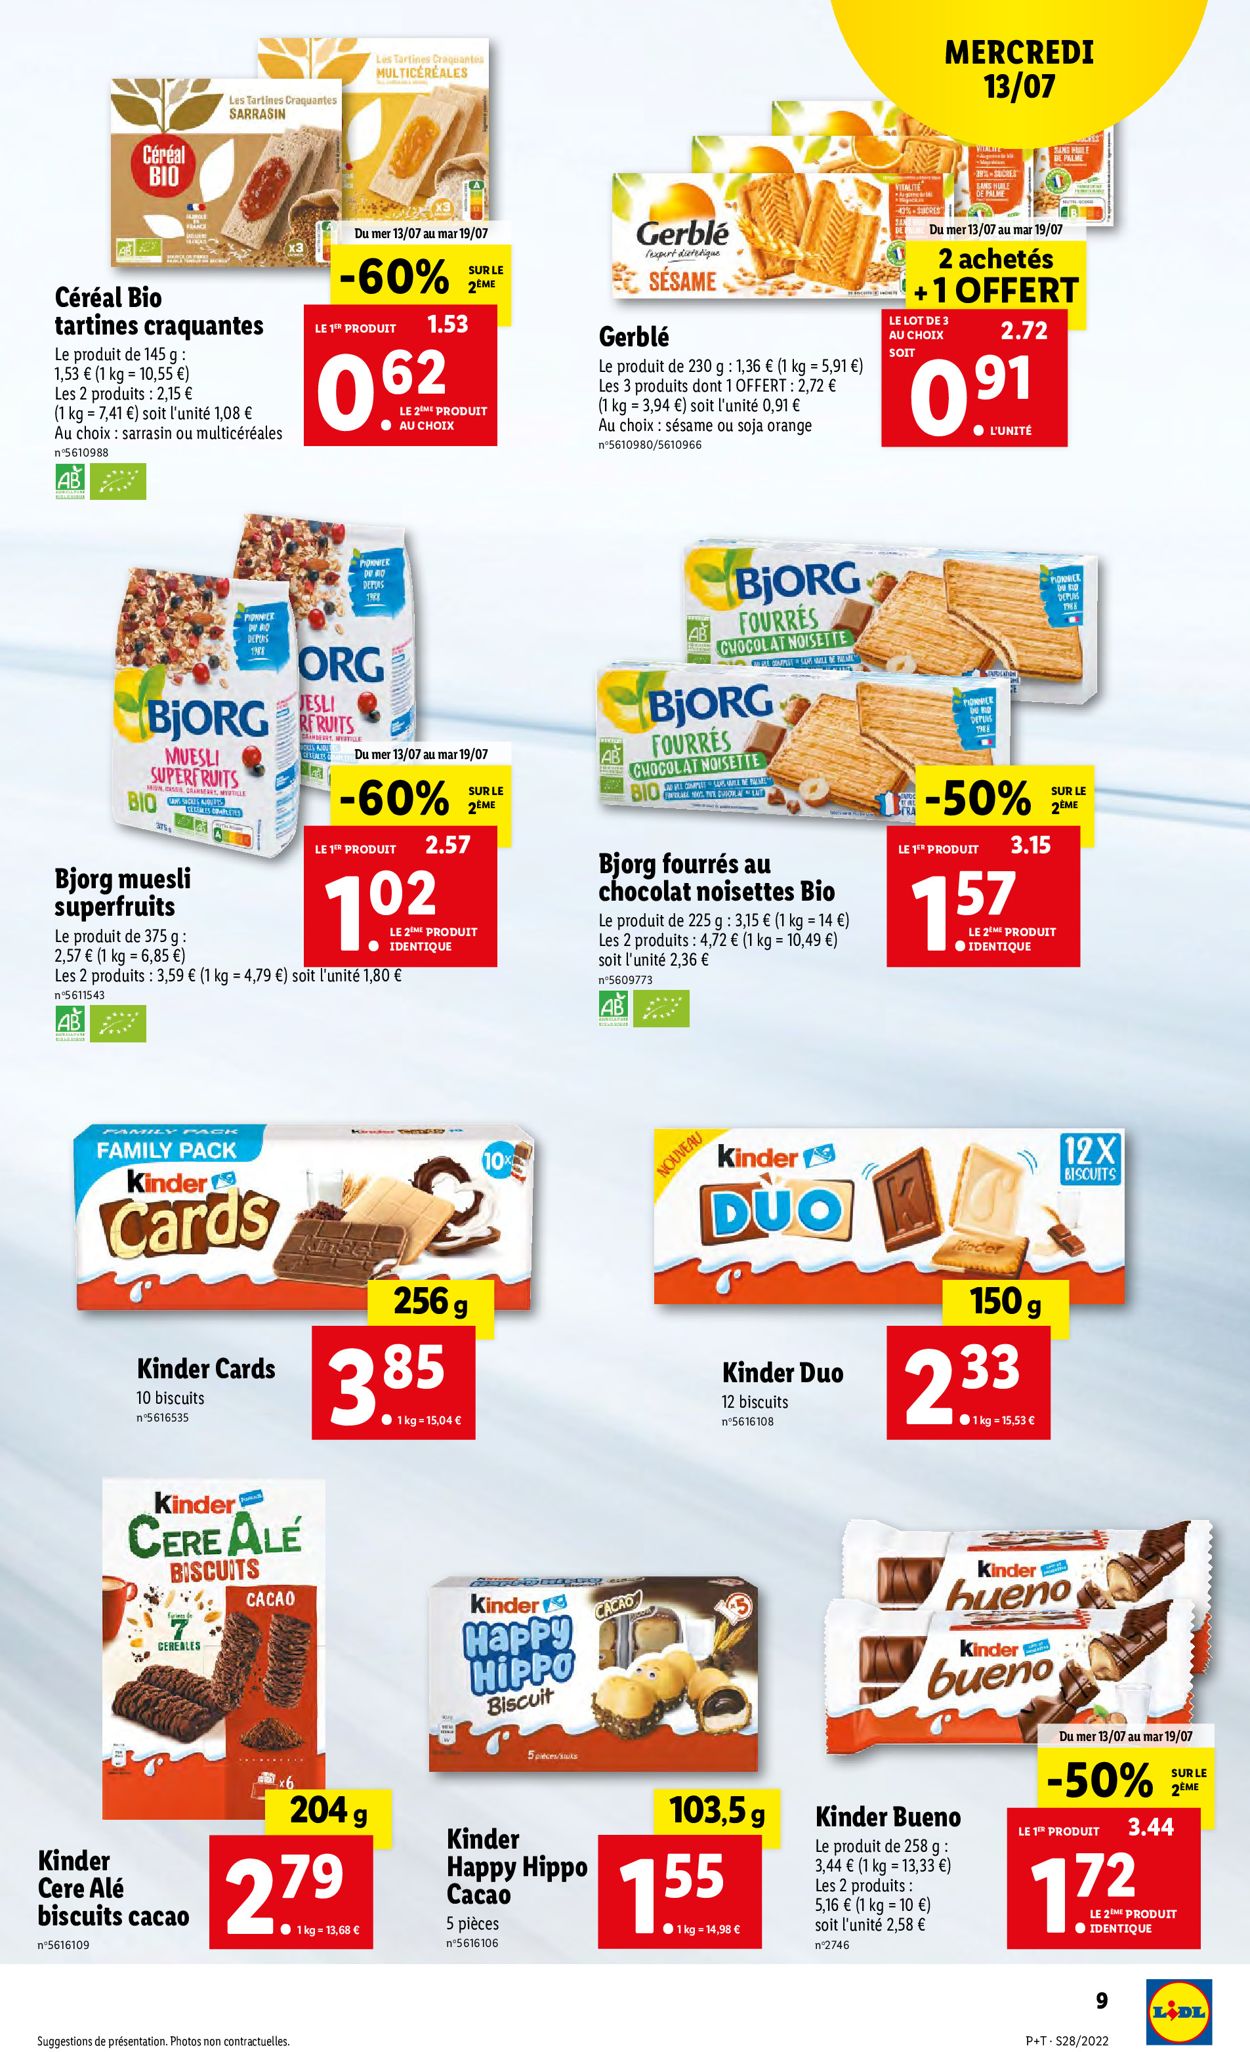 Lidl Catalogue - 13.07-19.07.2022 (Page 9)